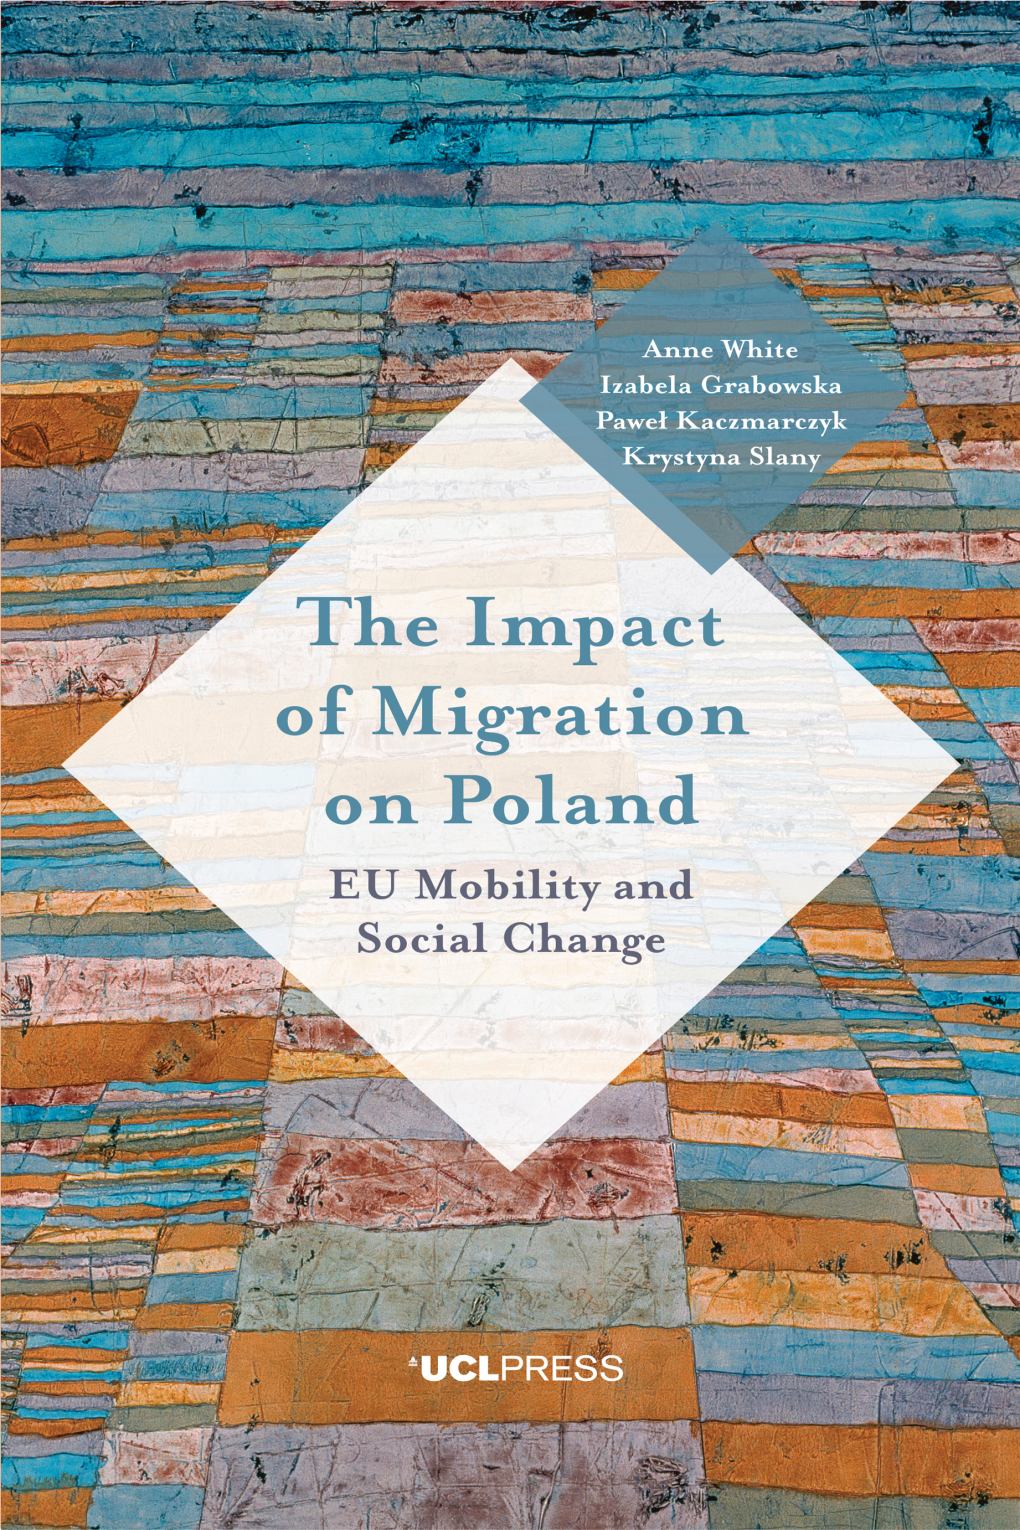 The Impact of Migration on Poland. EU Mobility and Social Change